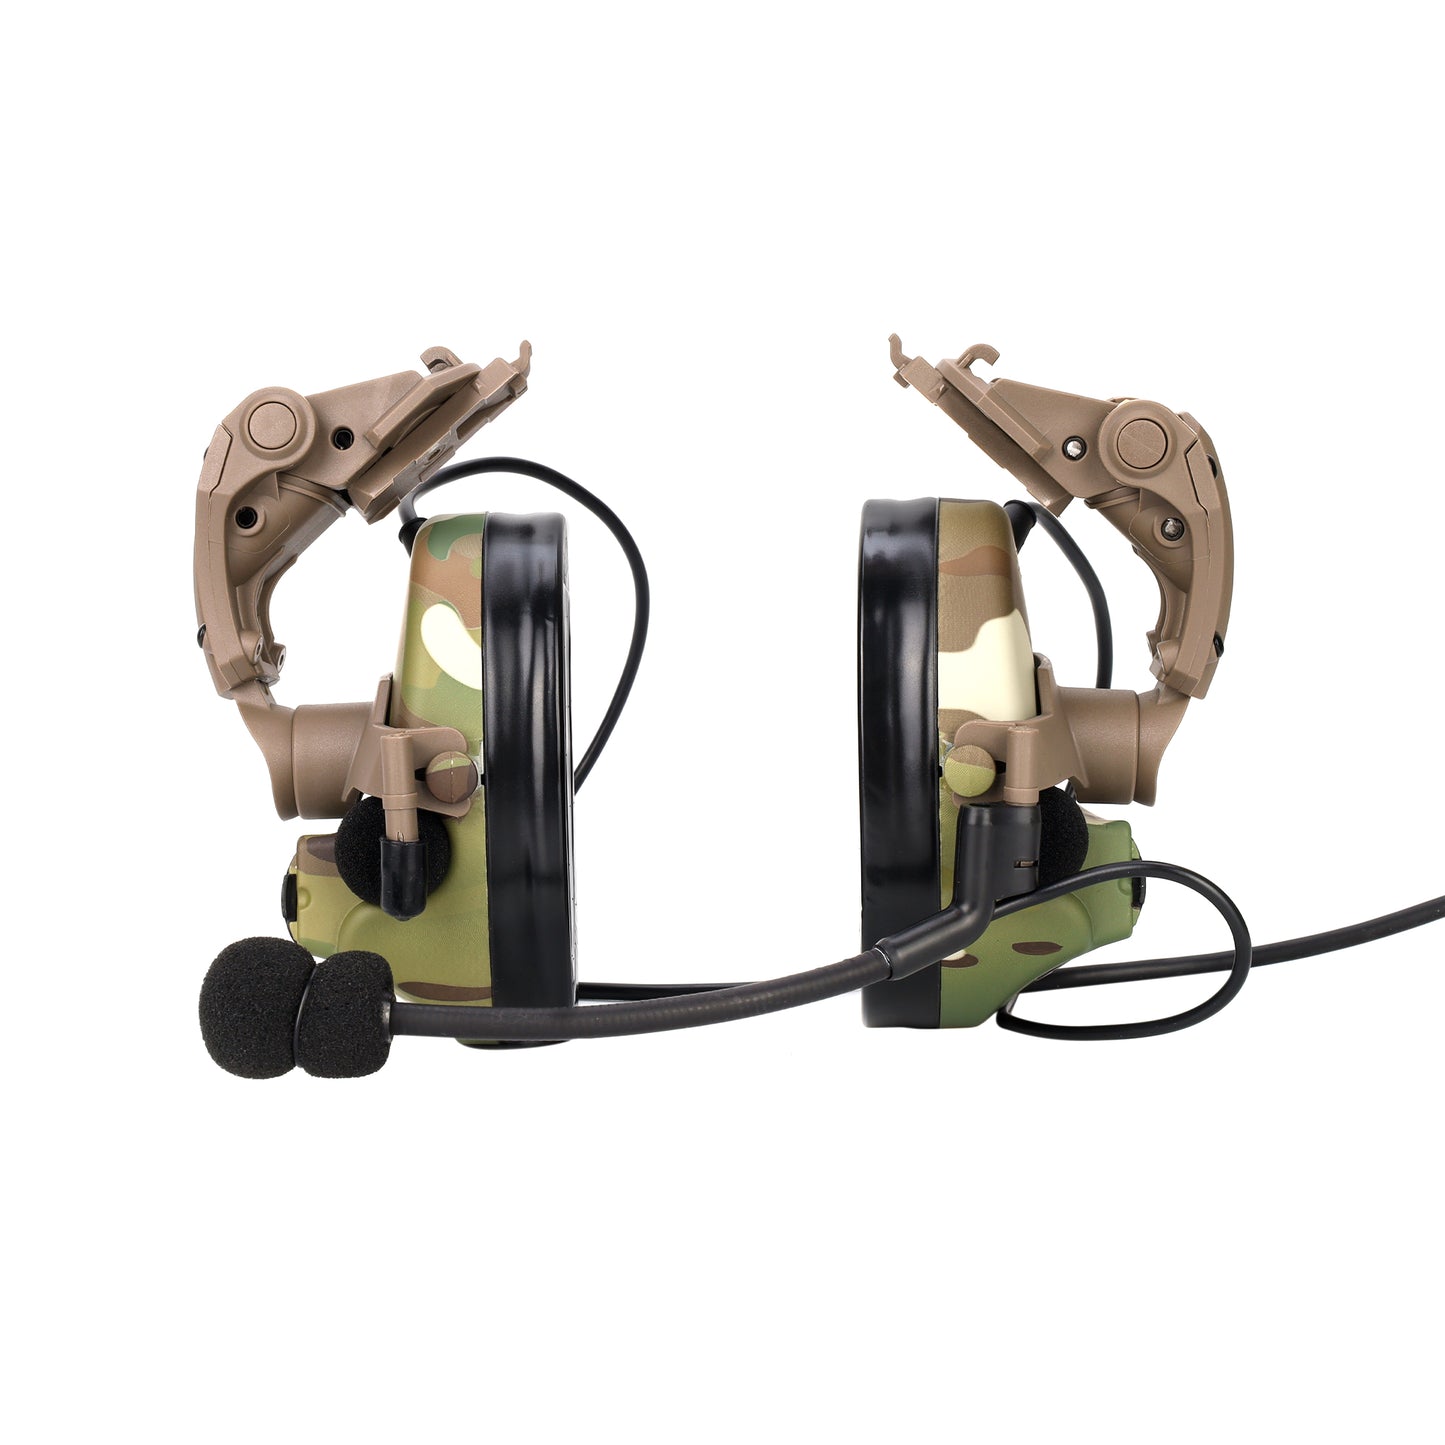 NRR 23db Electronic Hearing Protection Communications Headset with Helmet Rail Adapters